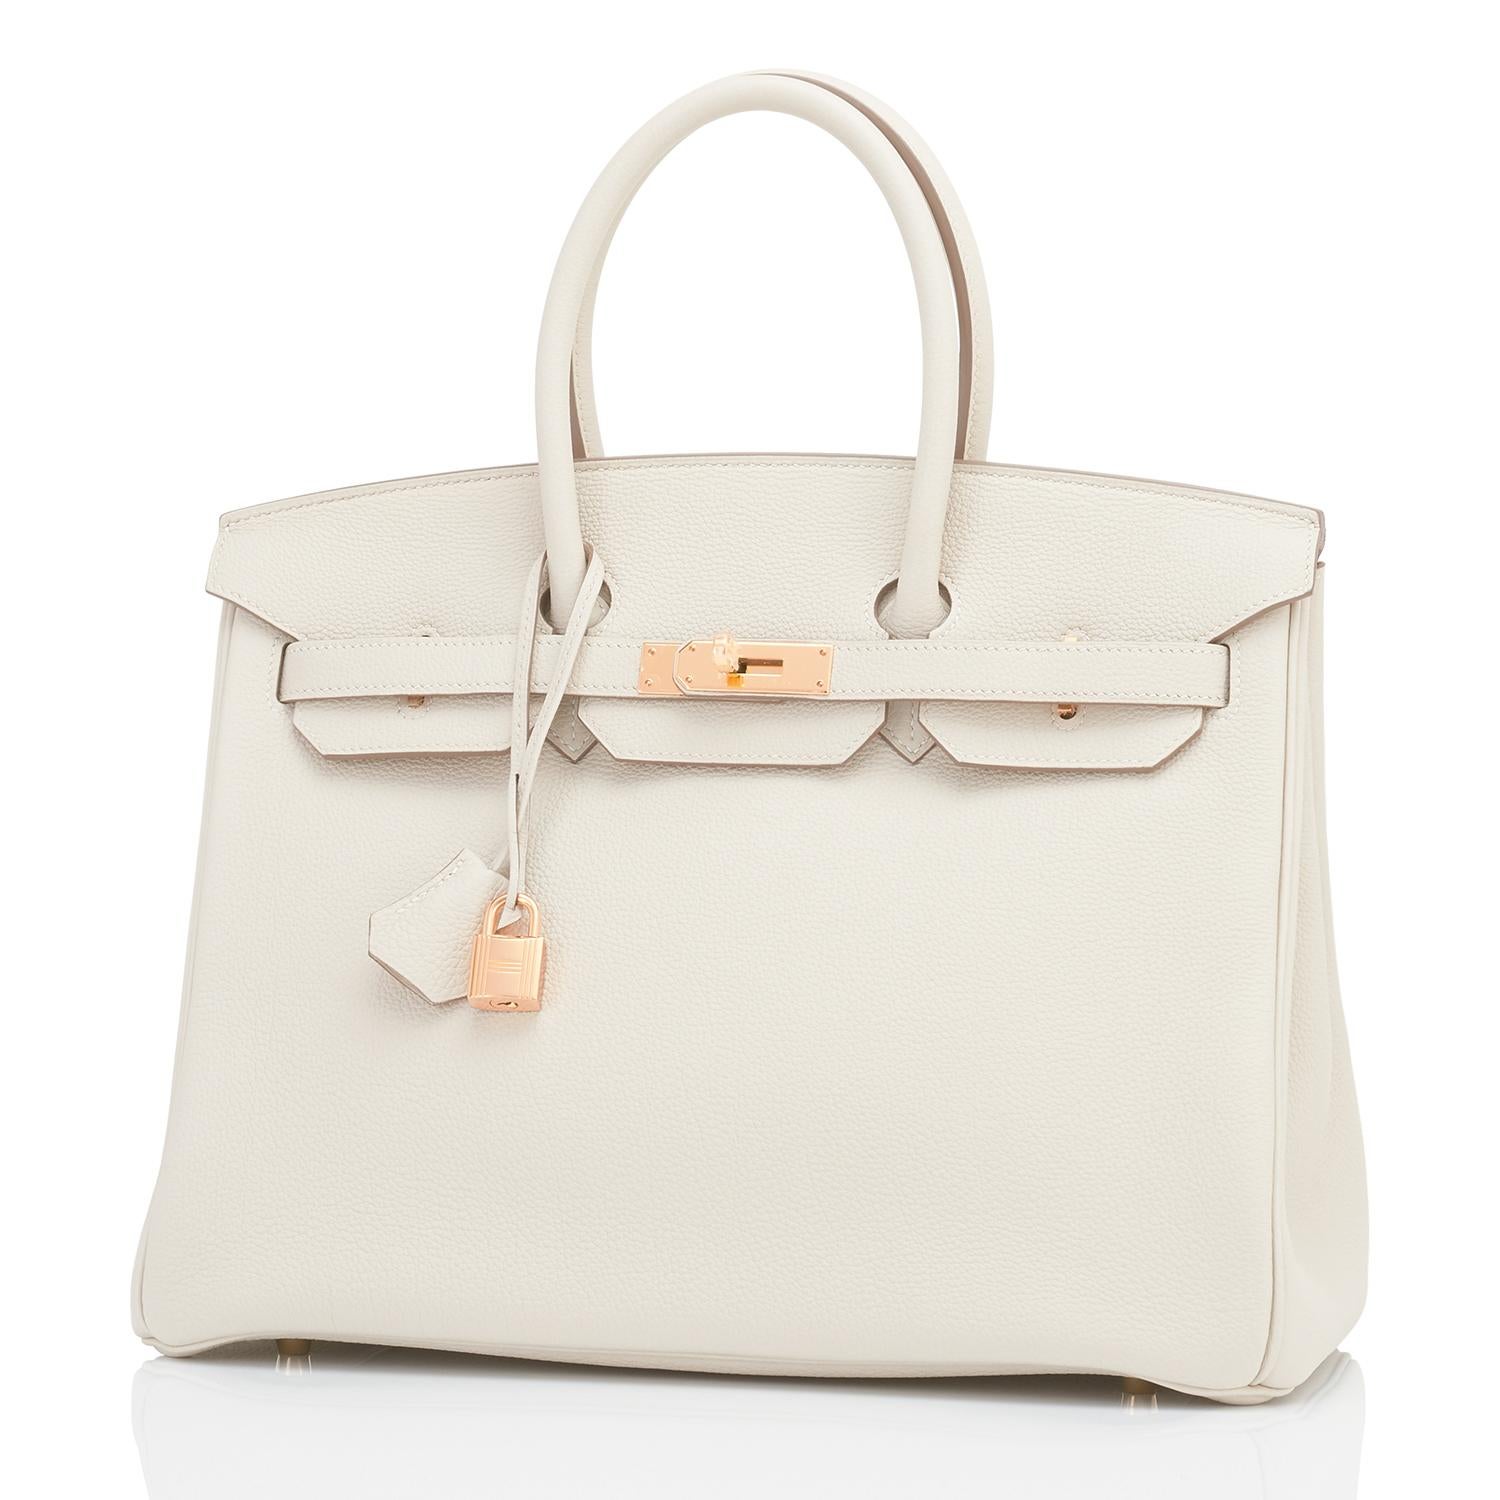 Hermes Craie 35cm Birkin Togo Rose Gold Hardware Chalk Off White Y Stamp, 2020
Just purchased from Hermes store; bag bears new interior 2020 Y Stamp.
Brand New in Box. Store fresh. Pristine Condition (plastic on hardware.) 
Perfect gift! Comes in